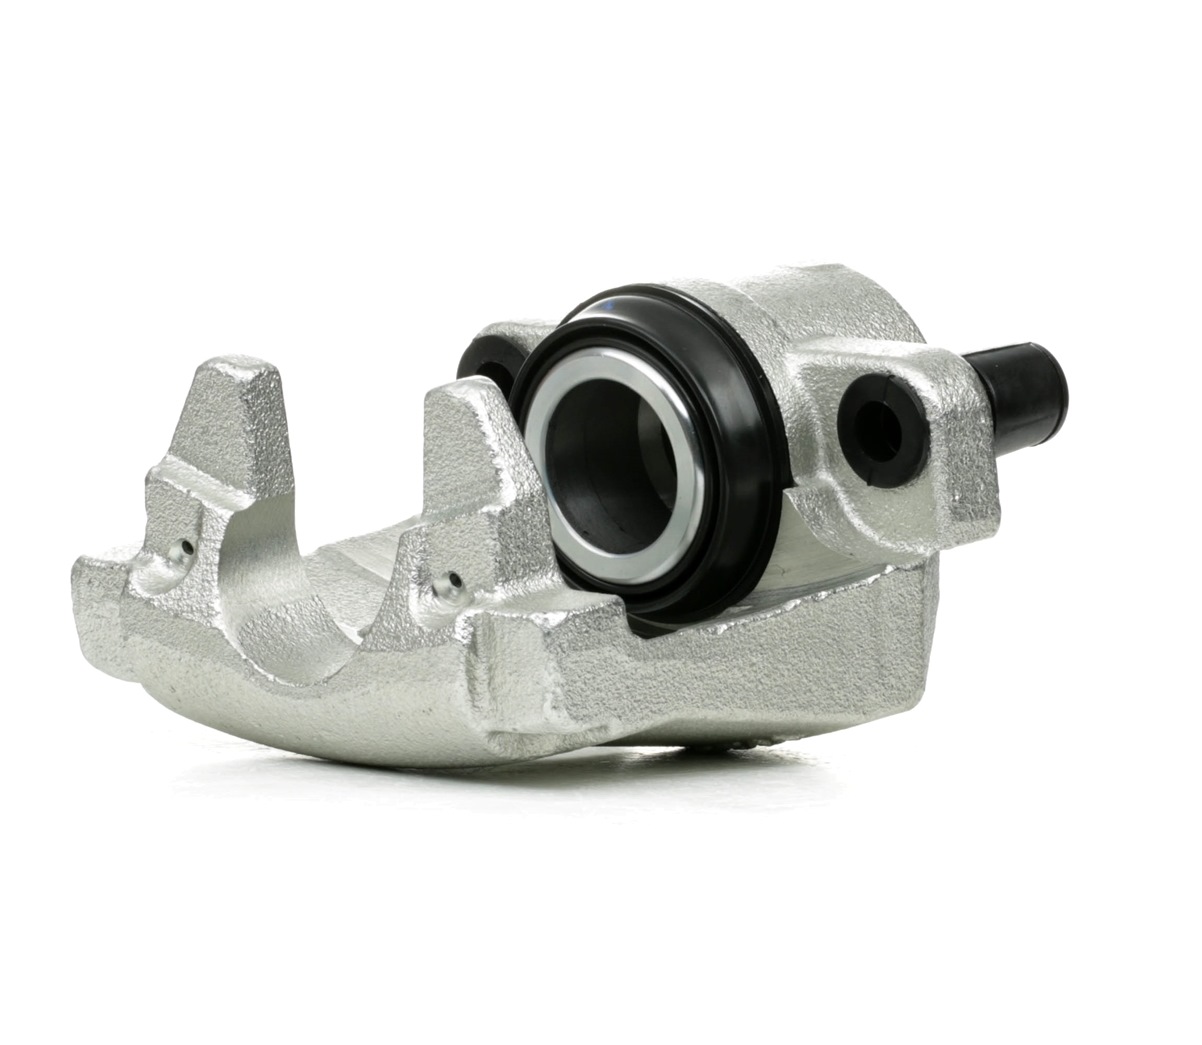 SKBC-0460433 STARK Brake calipers VOLVO Cast Iron, 94mm, Rear Axle Left, in front of axle, without holder